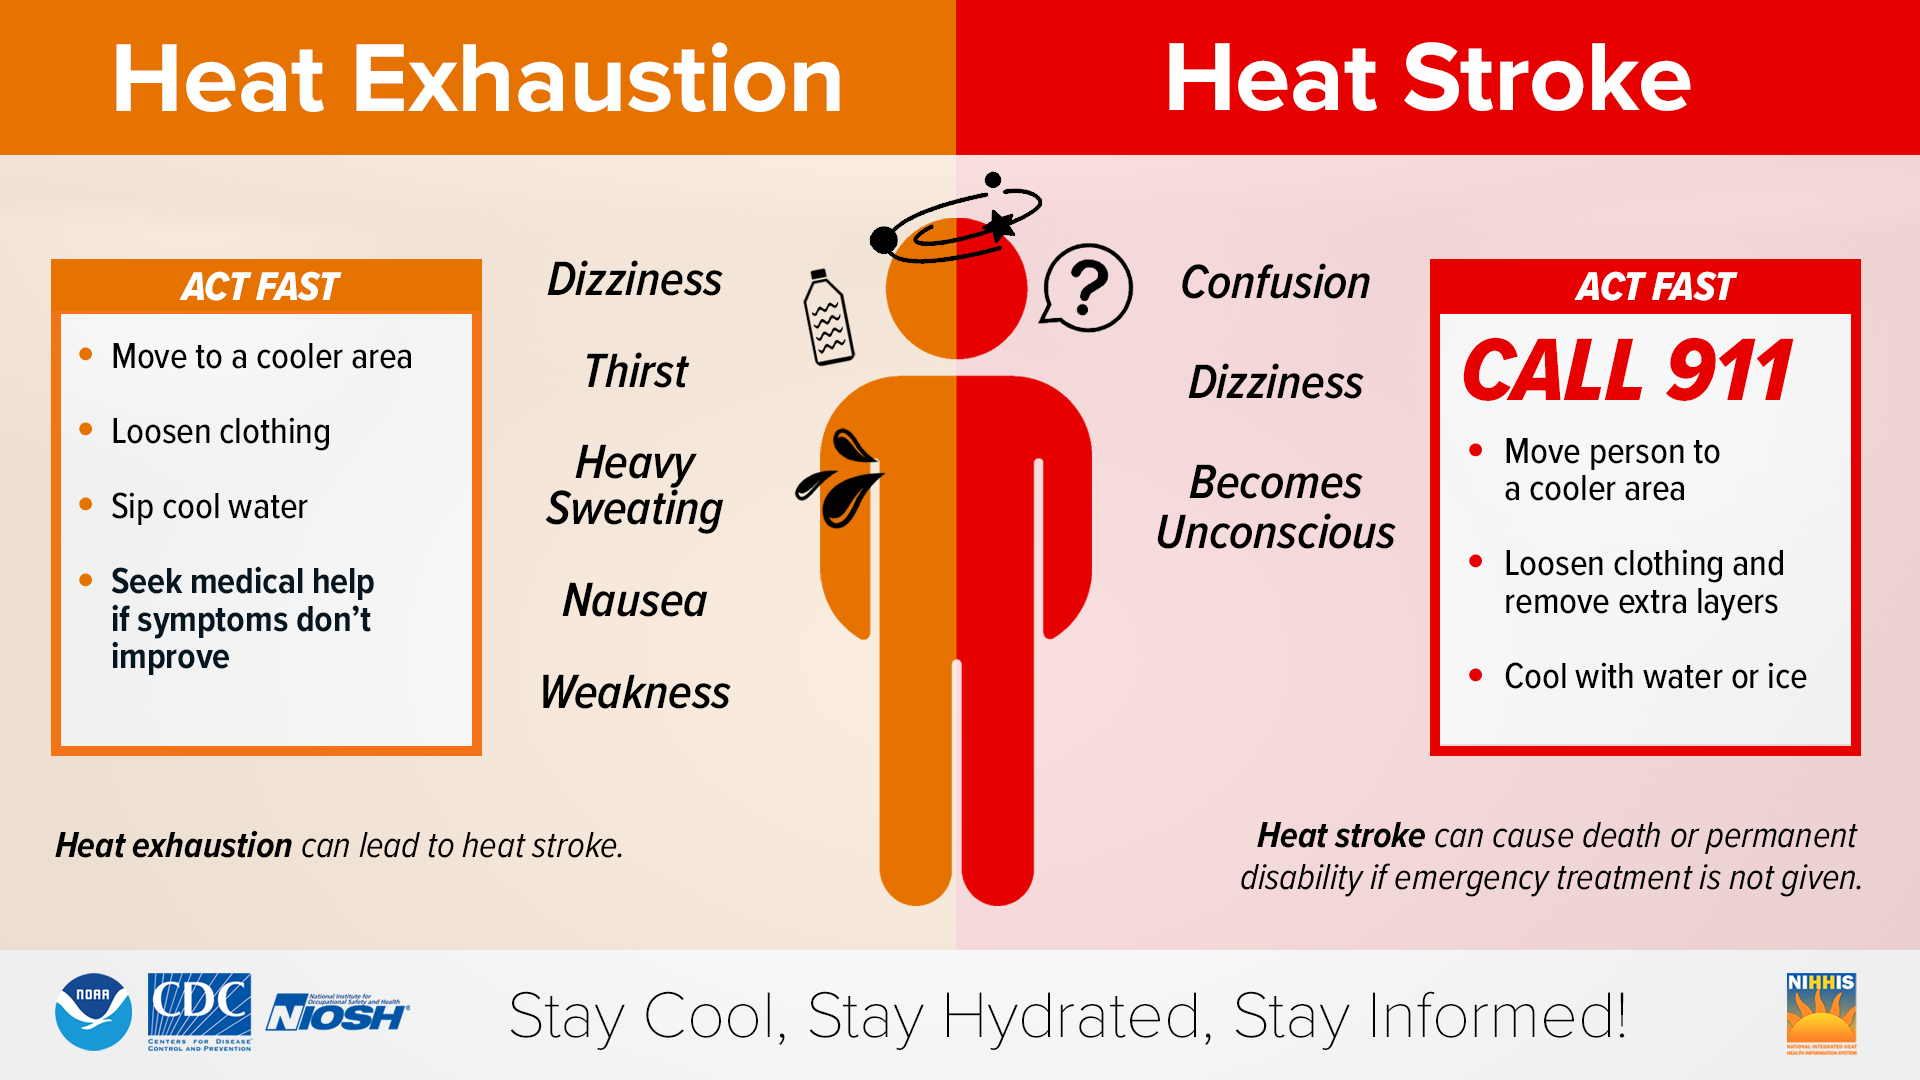 An infographic about Heat Exhaustion and Heat Stroke.